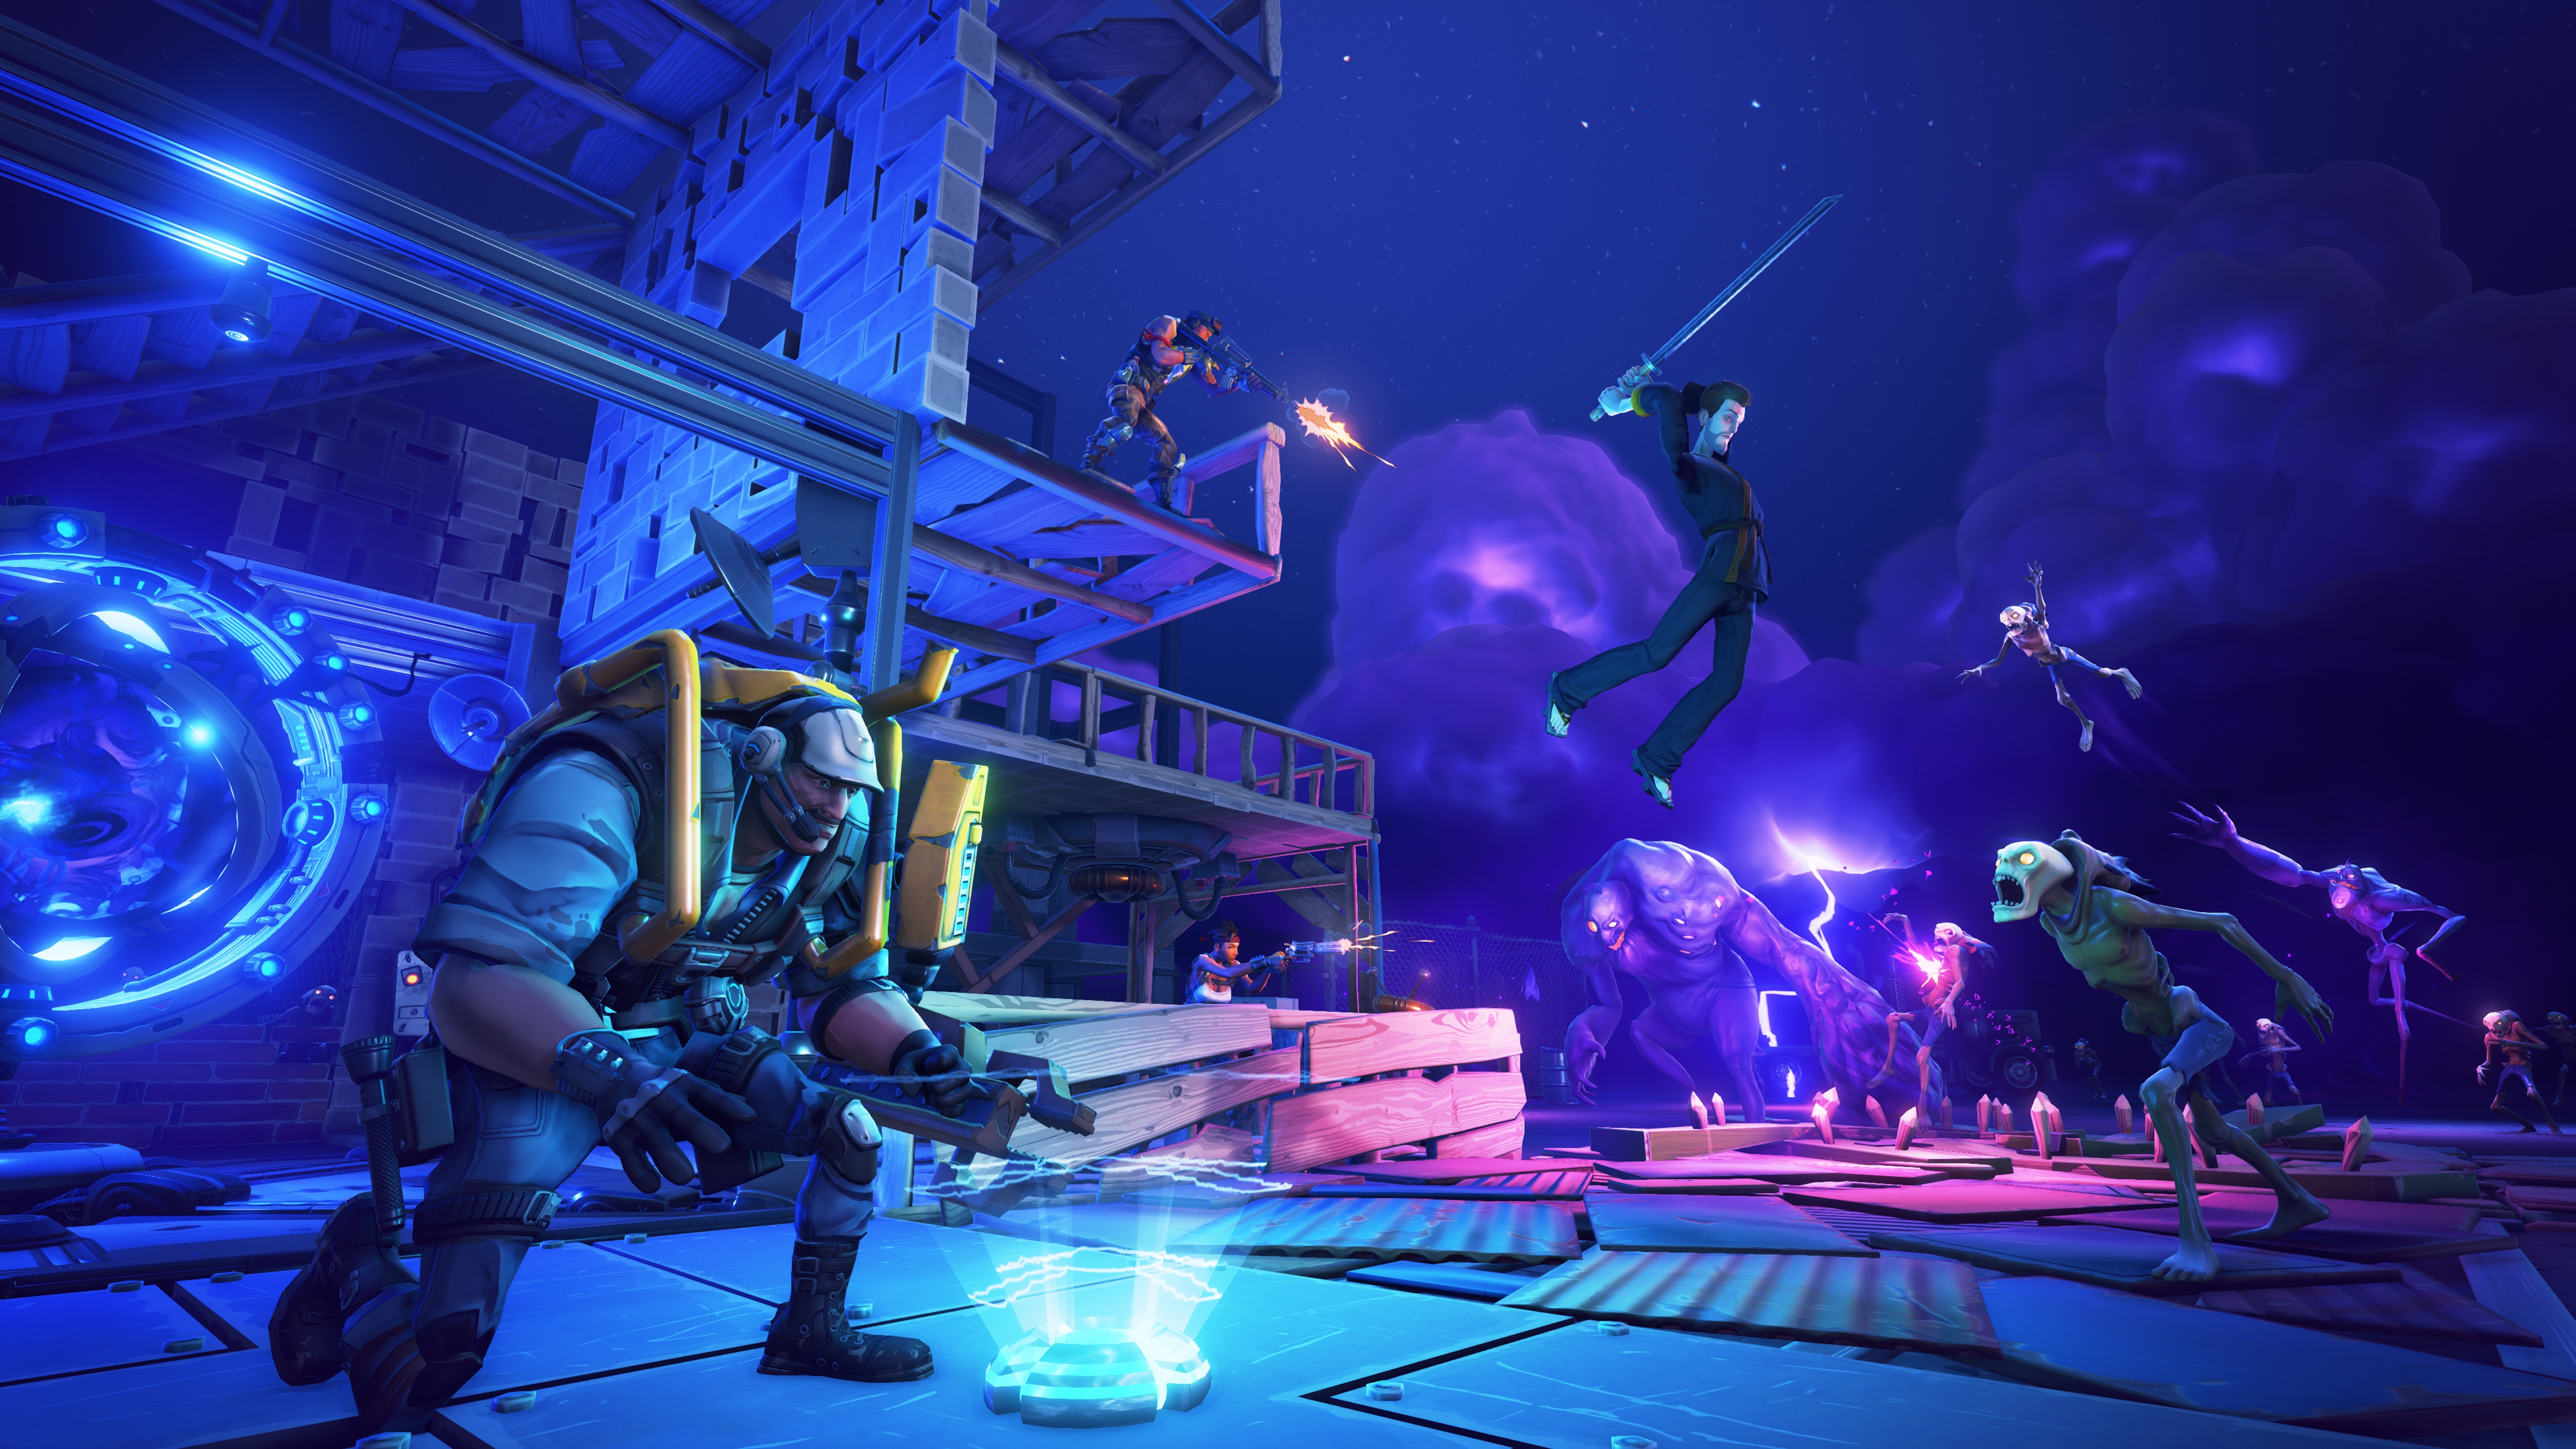 Get mini and festival passes for free with Fortnite Crew subscription.